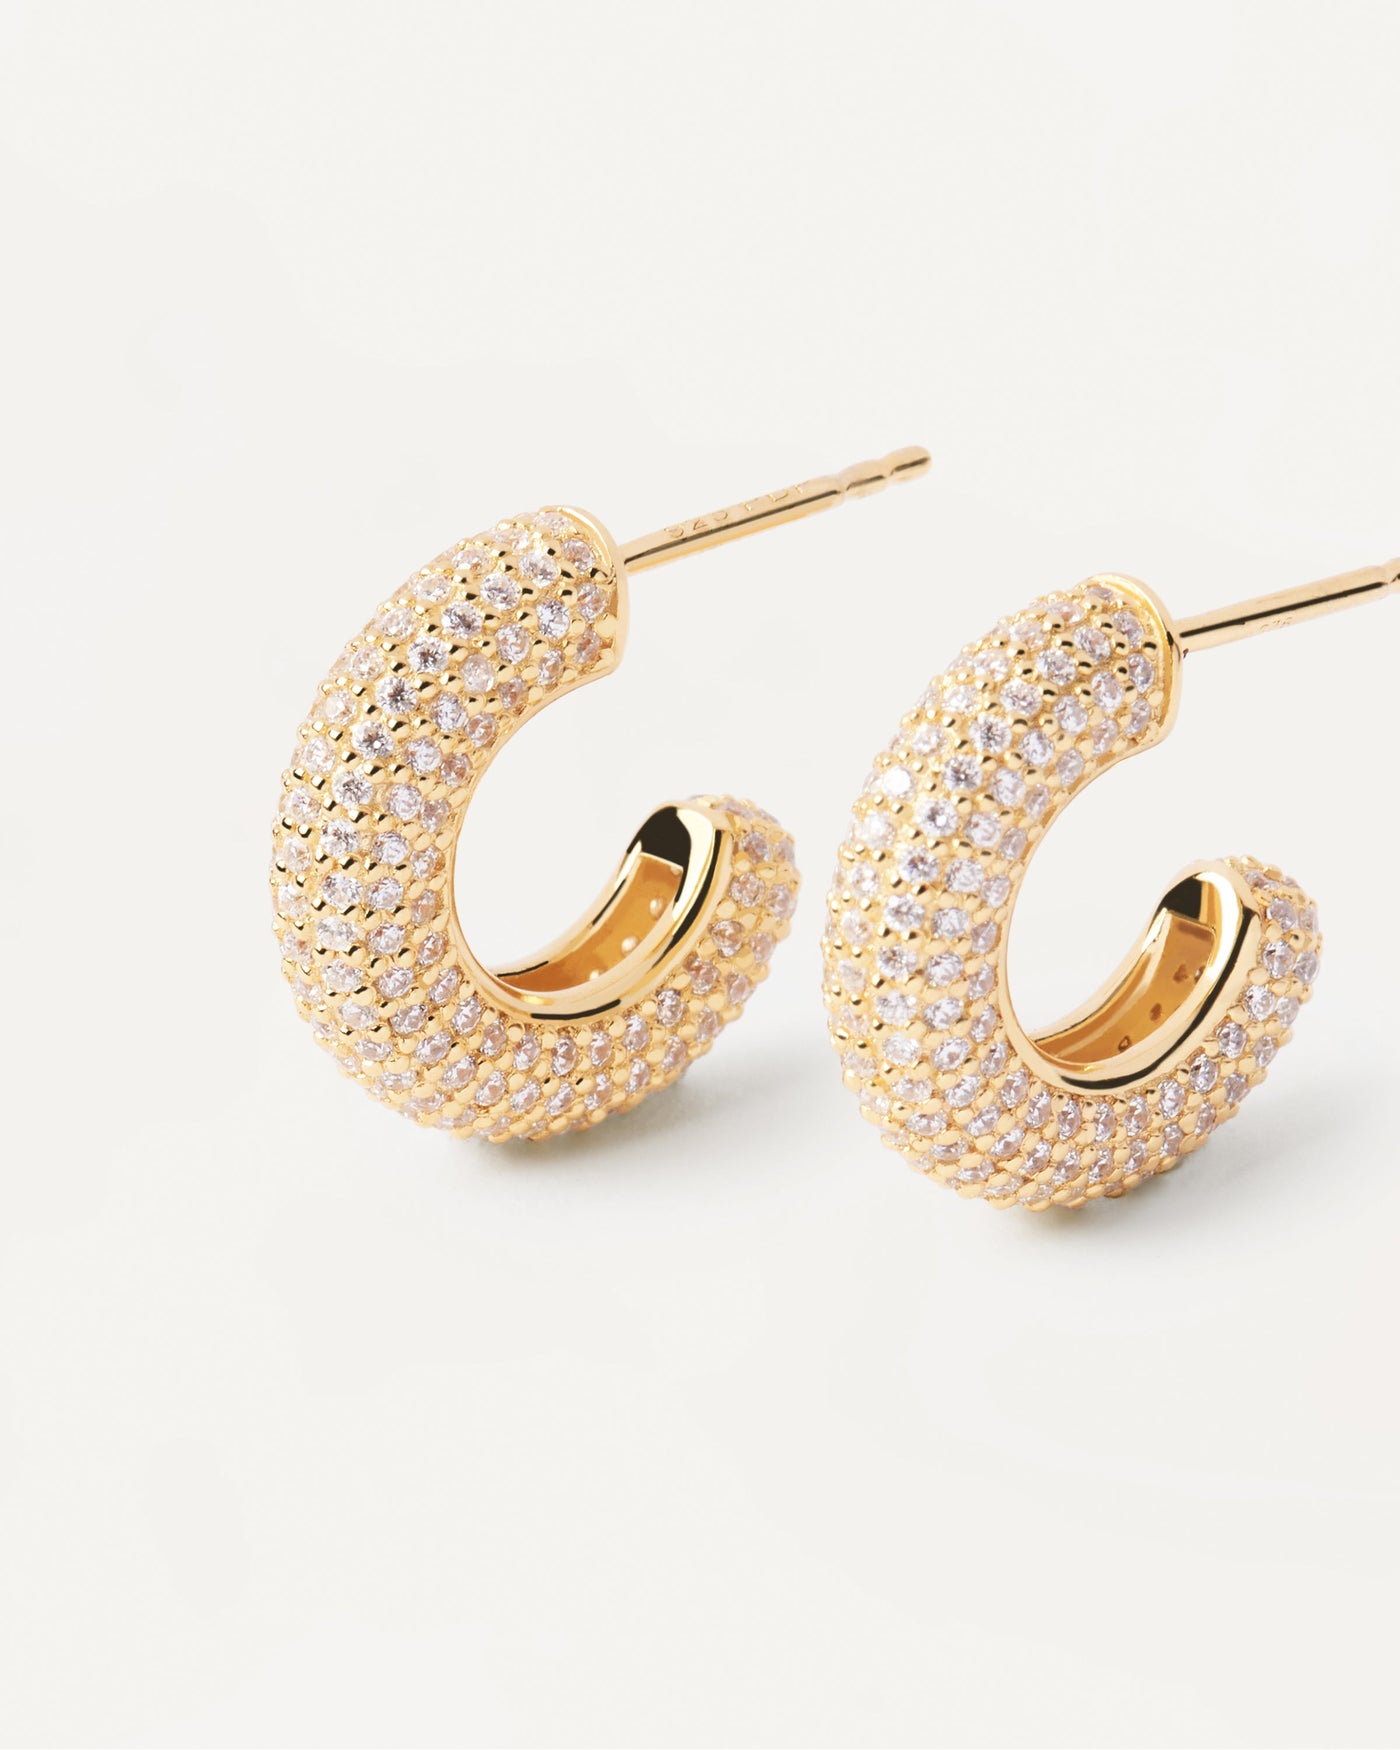 2023 Selection | King Earrings. Gold-plated hoop earrings with white zirconia. Get the latest arrival from PDPAOLA. Place your order safely and get this Best Seller. Free Shipping.